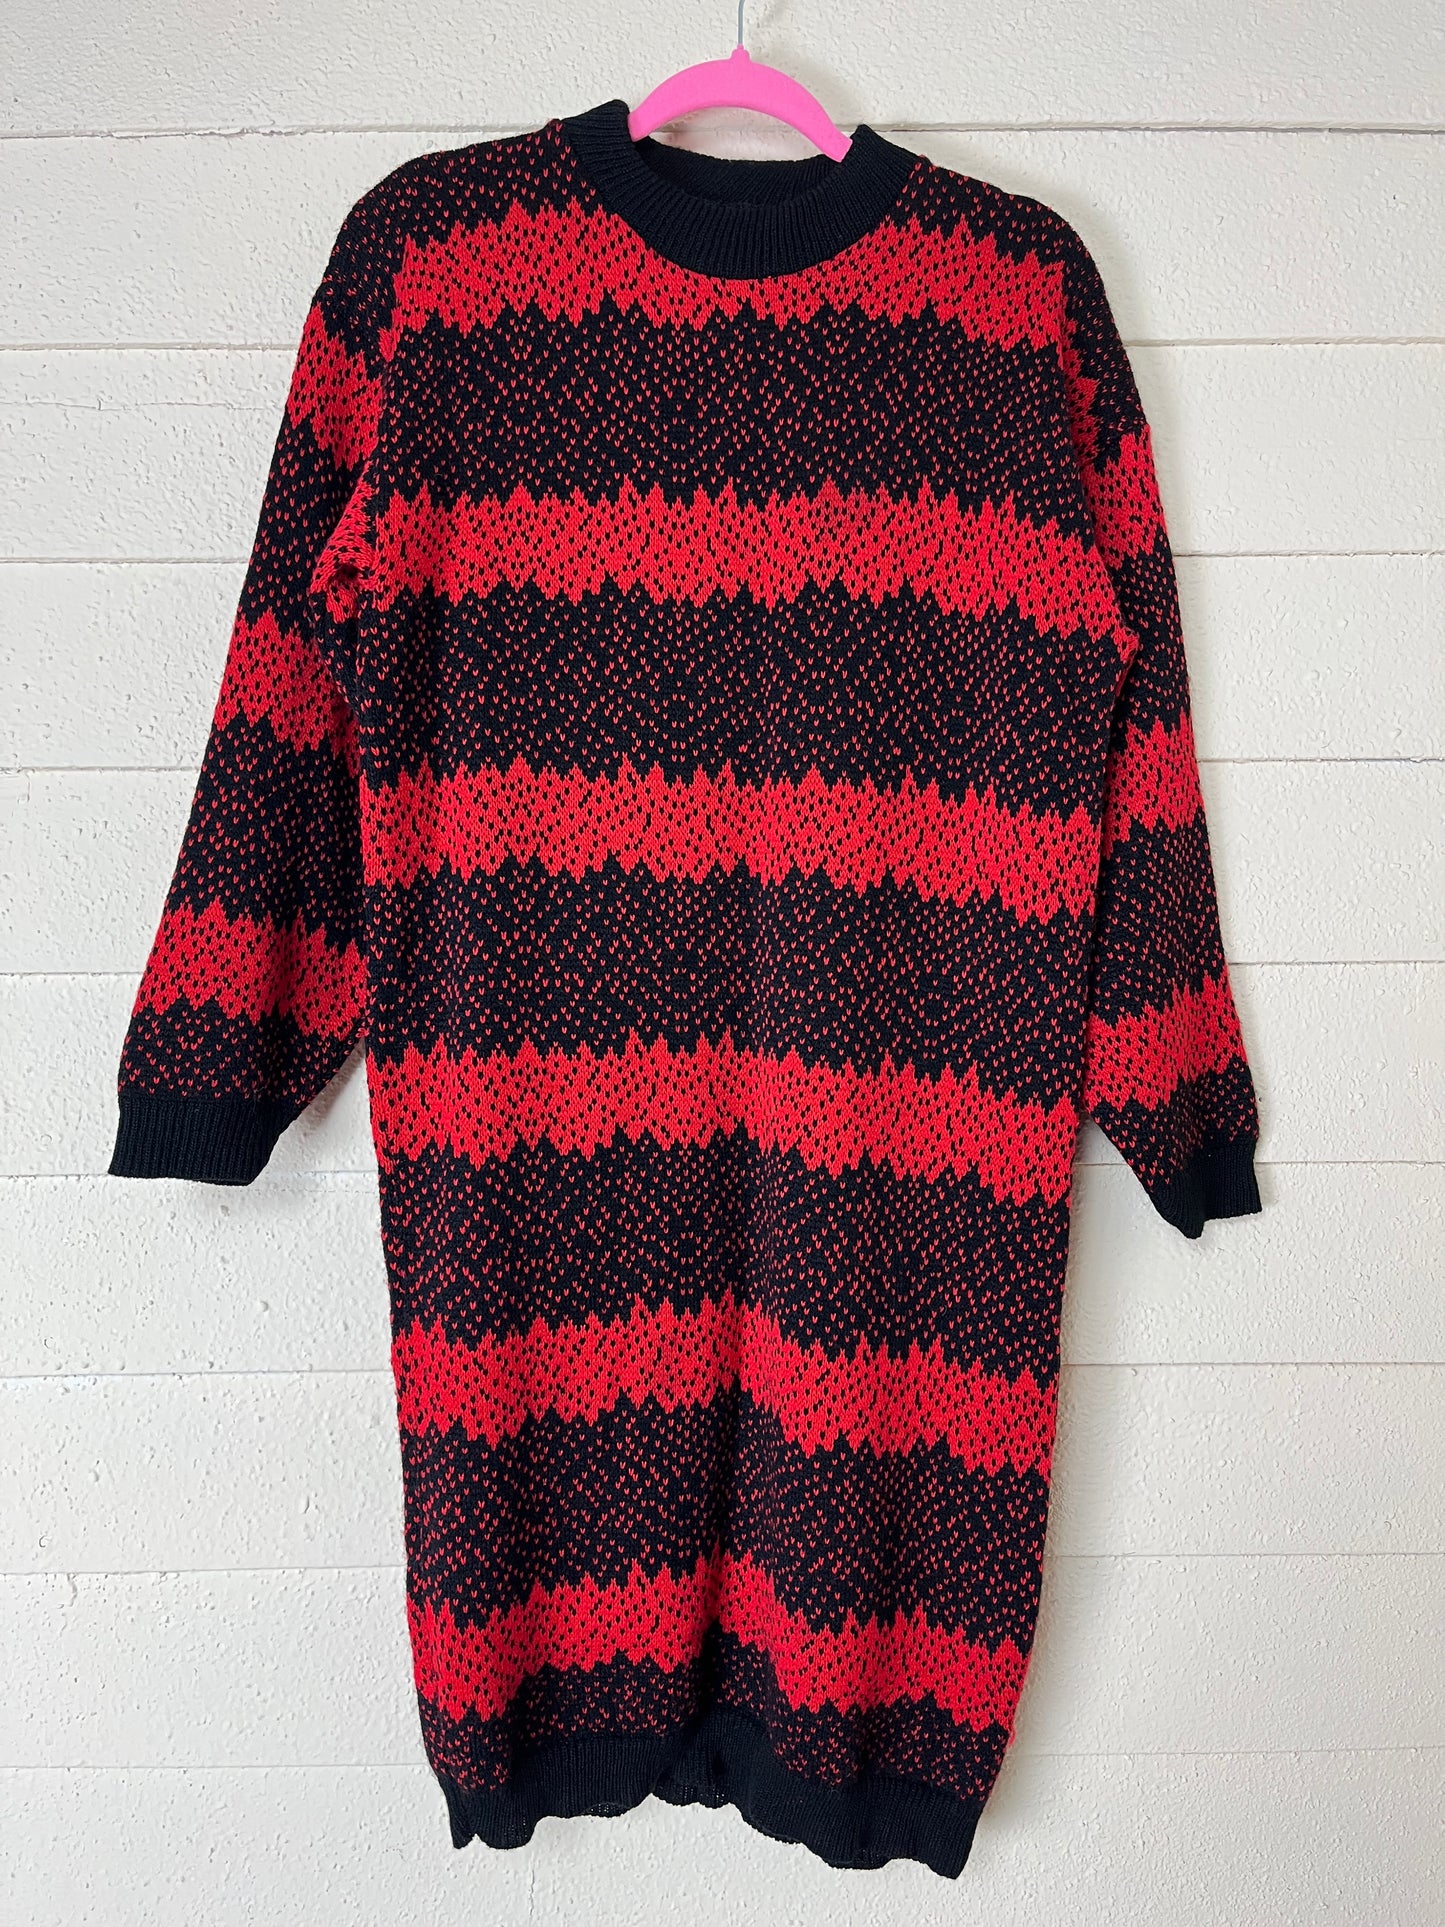 1980s TUFFI-LYNN RED AND BLACK RICK RACK PRINT SWEATER DRESS - size med to xl